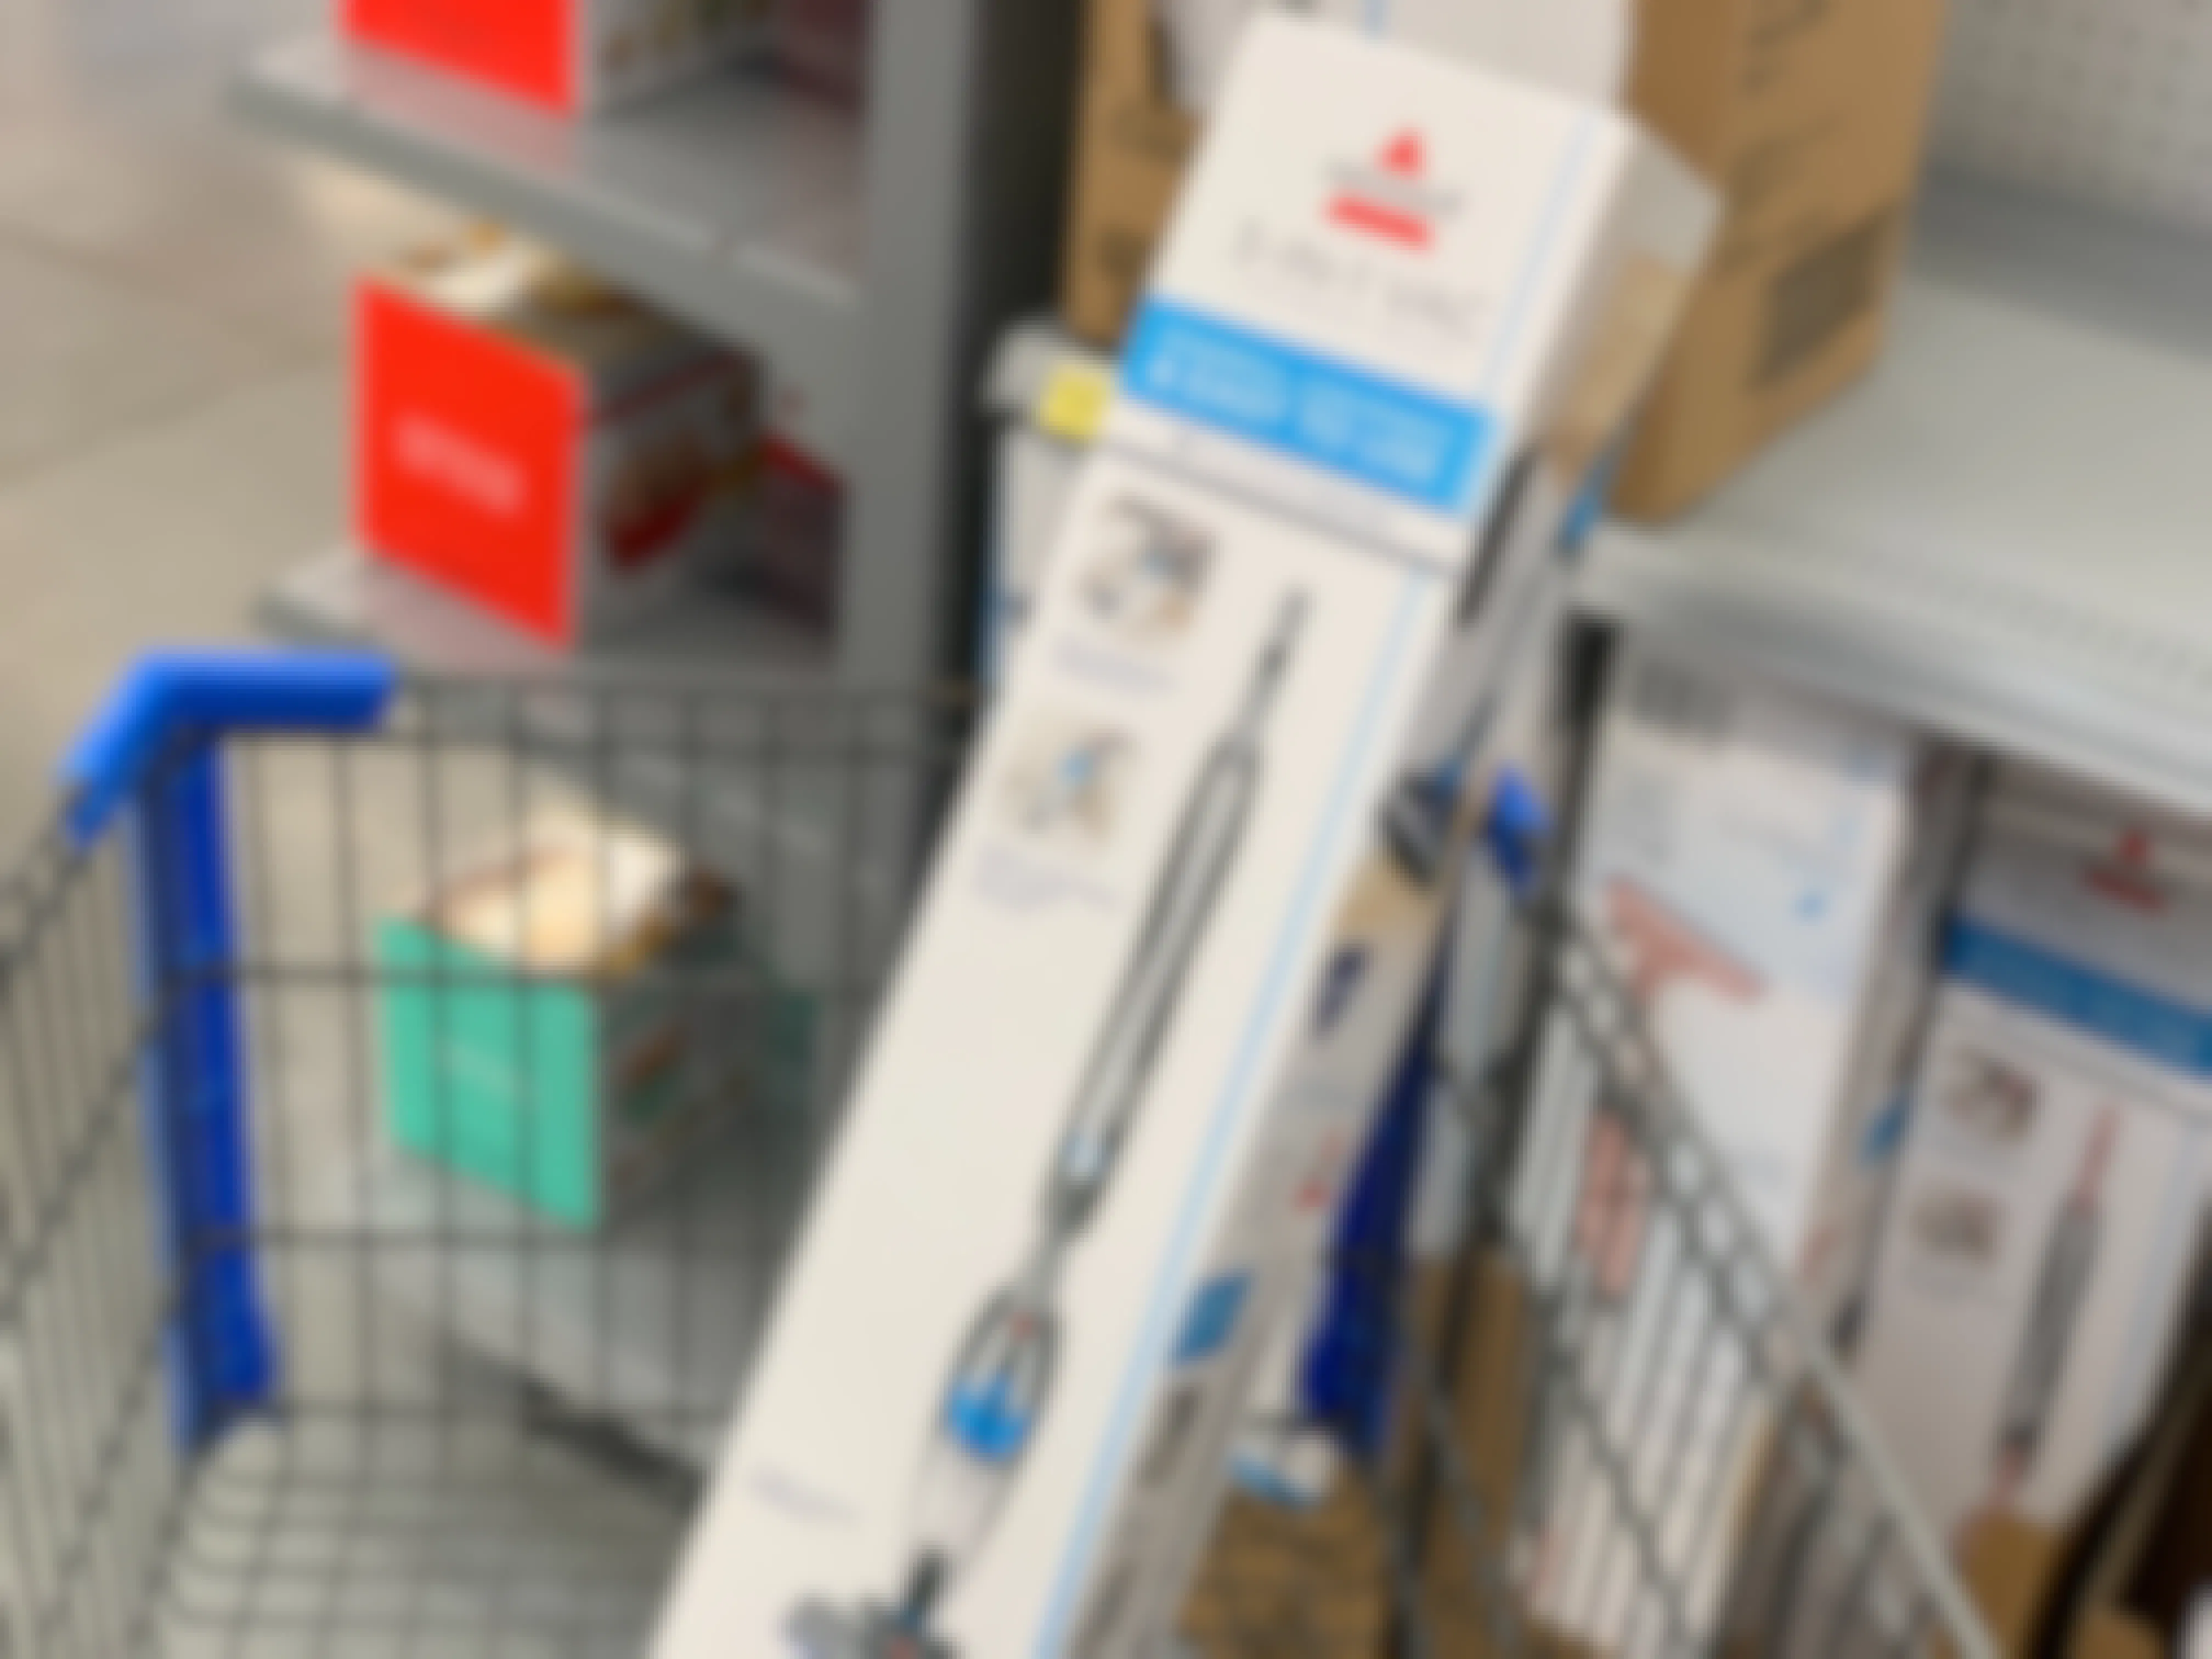 A Bissell 3-in-1 Vacuum in a Walmart shopping cart.